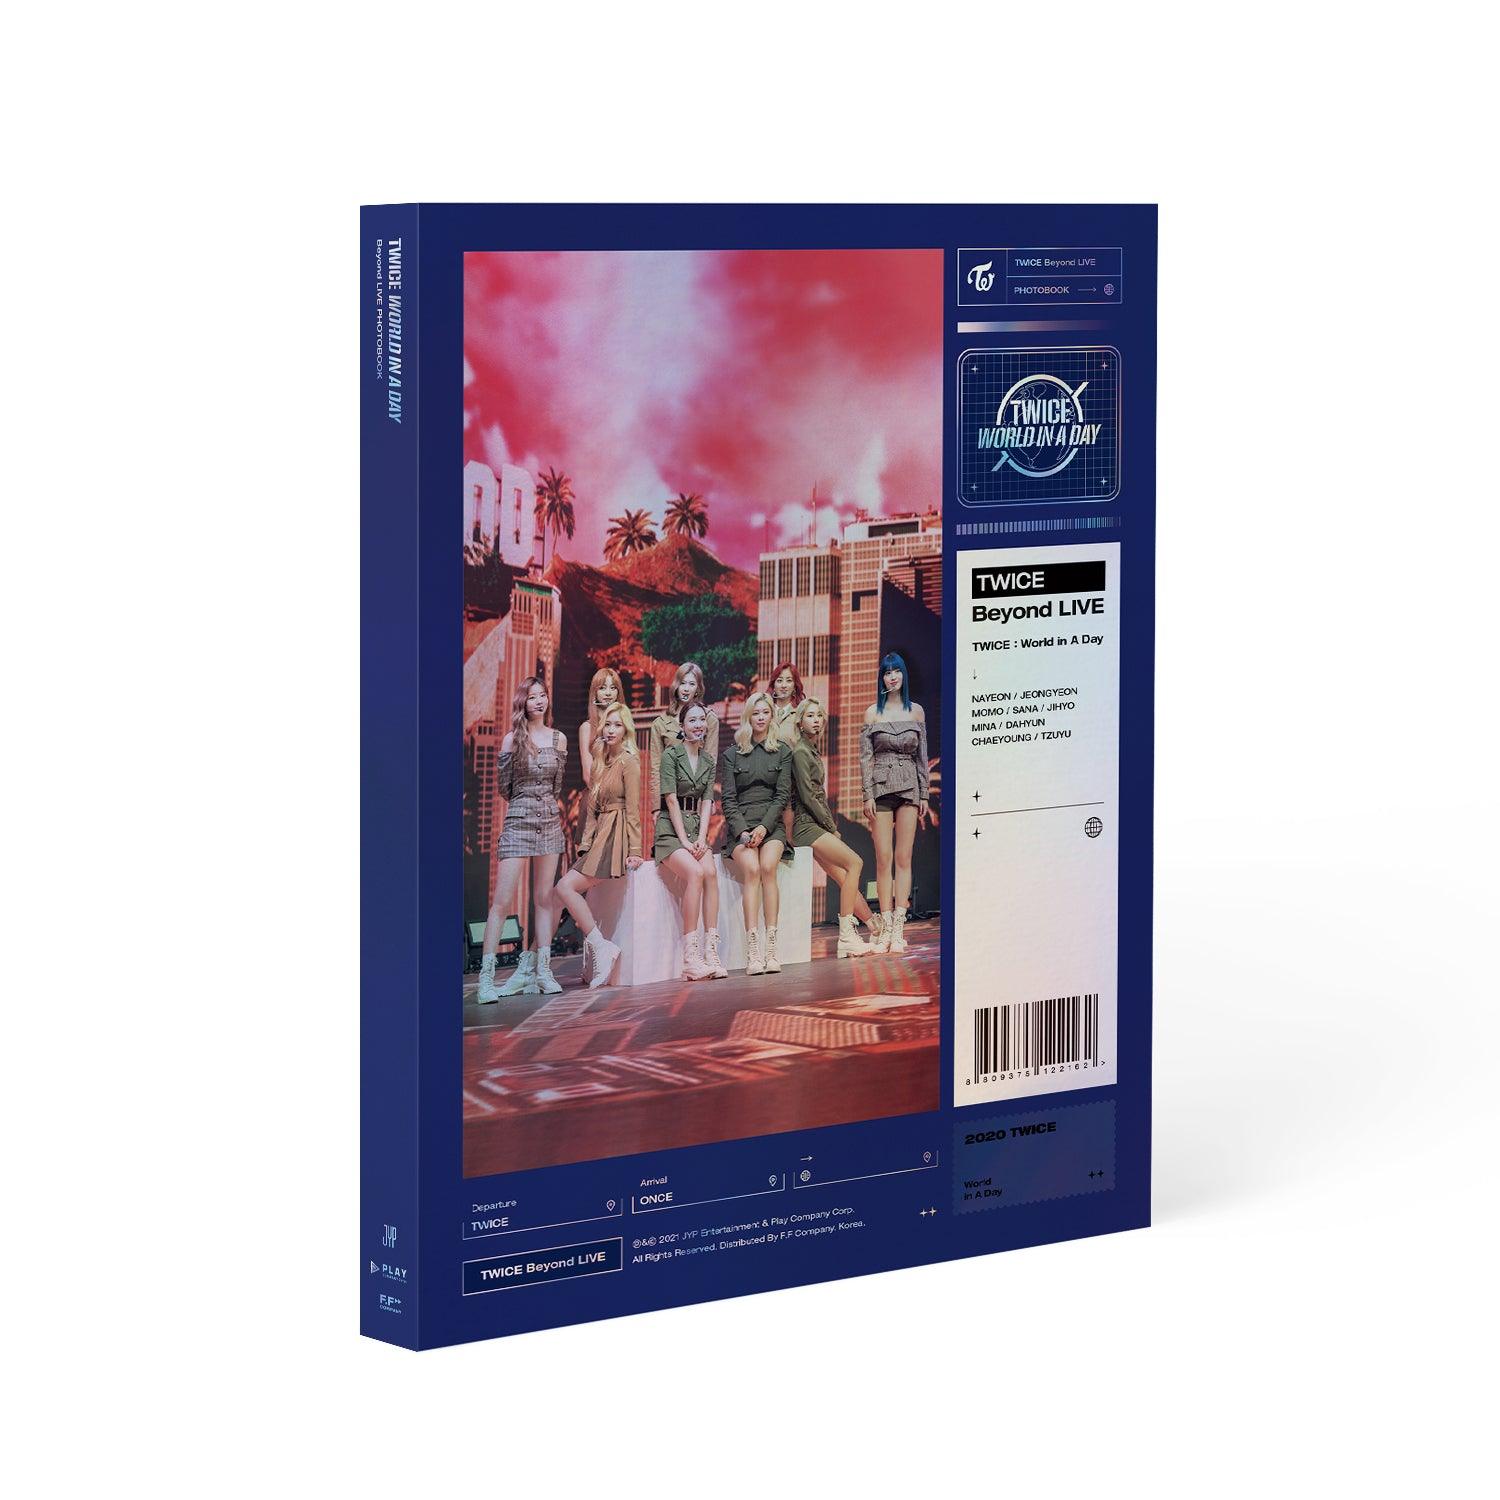 TWICE 'BEYOND LIVE : WORLD IN A DAY' PHOTO BOOK